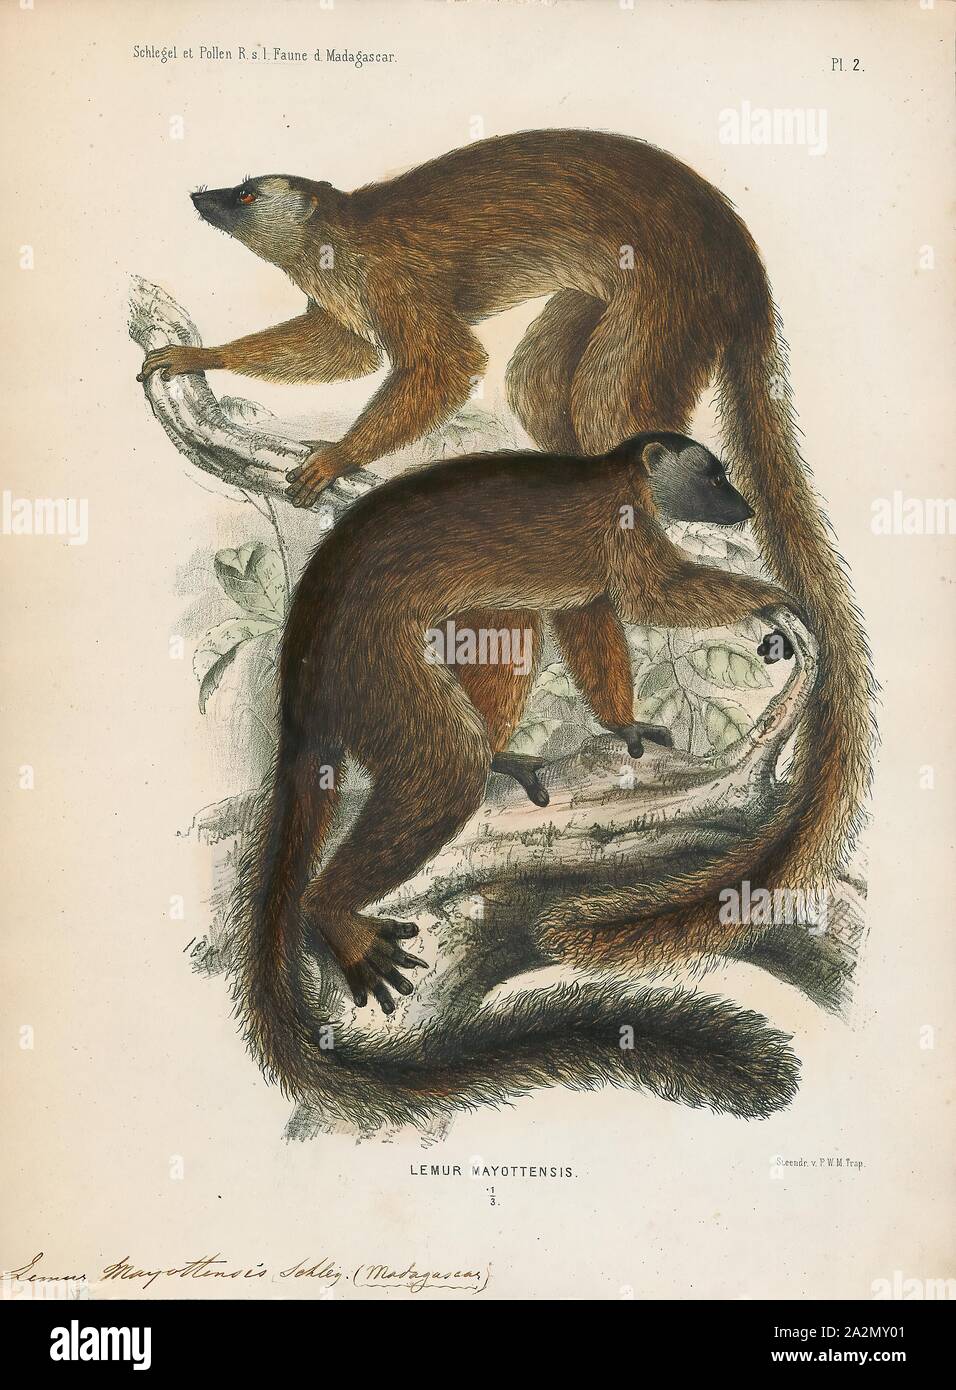 Lemur mayottensis, Print, Lemurs (from Latin lemures – ghosts or spirits) are mammals of the order Primates, divided into 8 families and consisting of 15 genera and around 100 existing species. They are native only to the island of Madagascar. Most existing lemurs are small, have a pointed snout, large eyes, and a long tail. They chiefly live in trees (arboreal), and are active at night (nocturnal)., 1868 Stock Photo